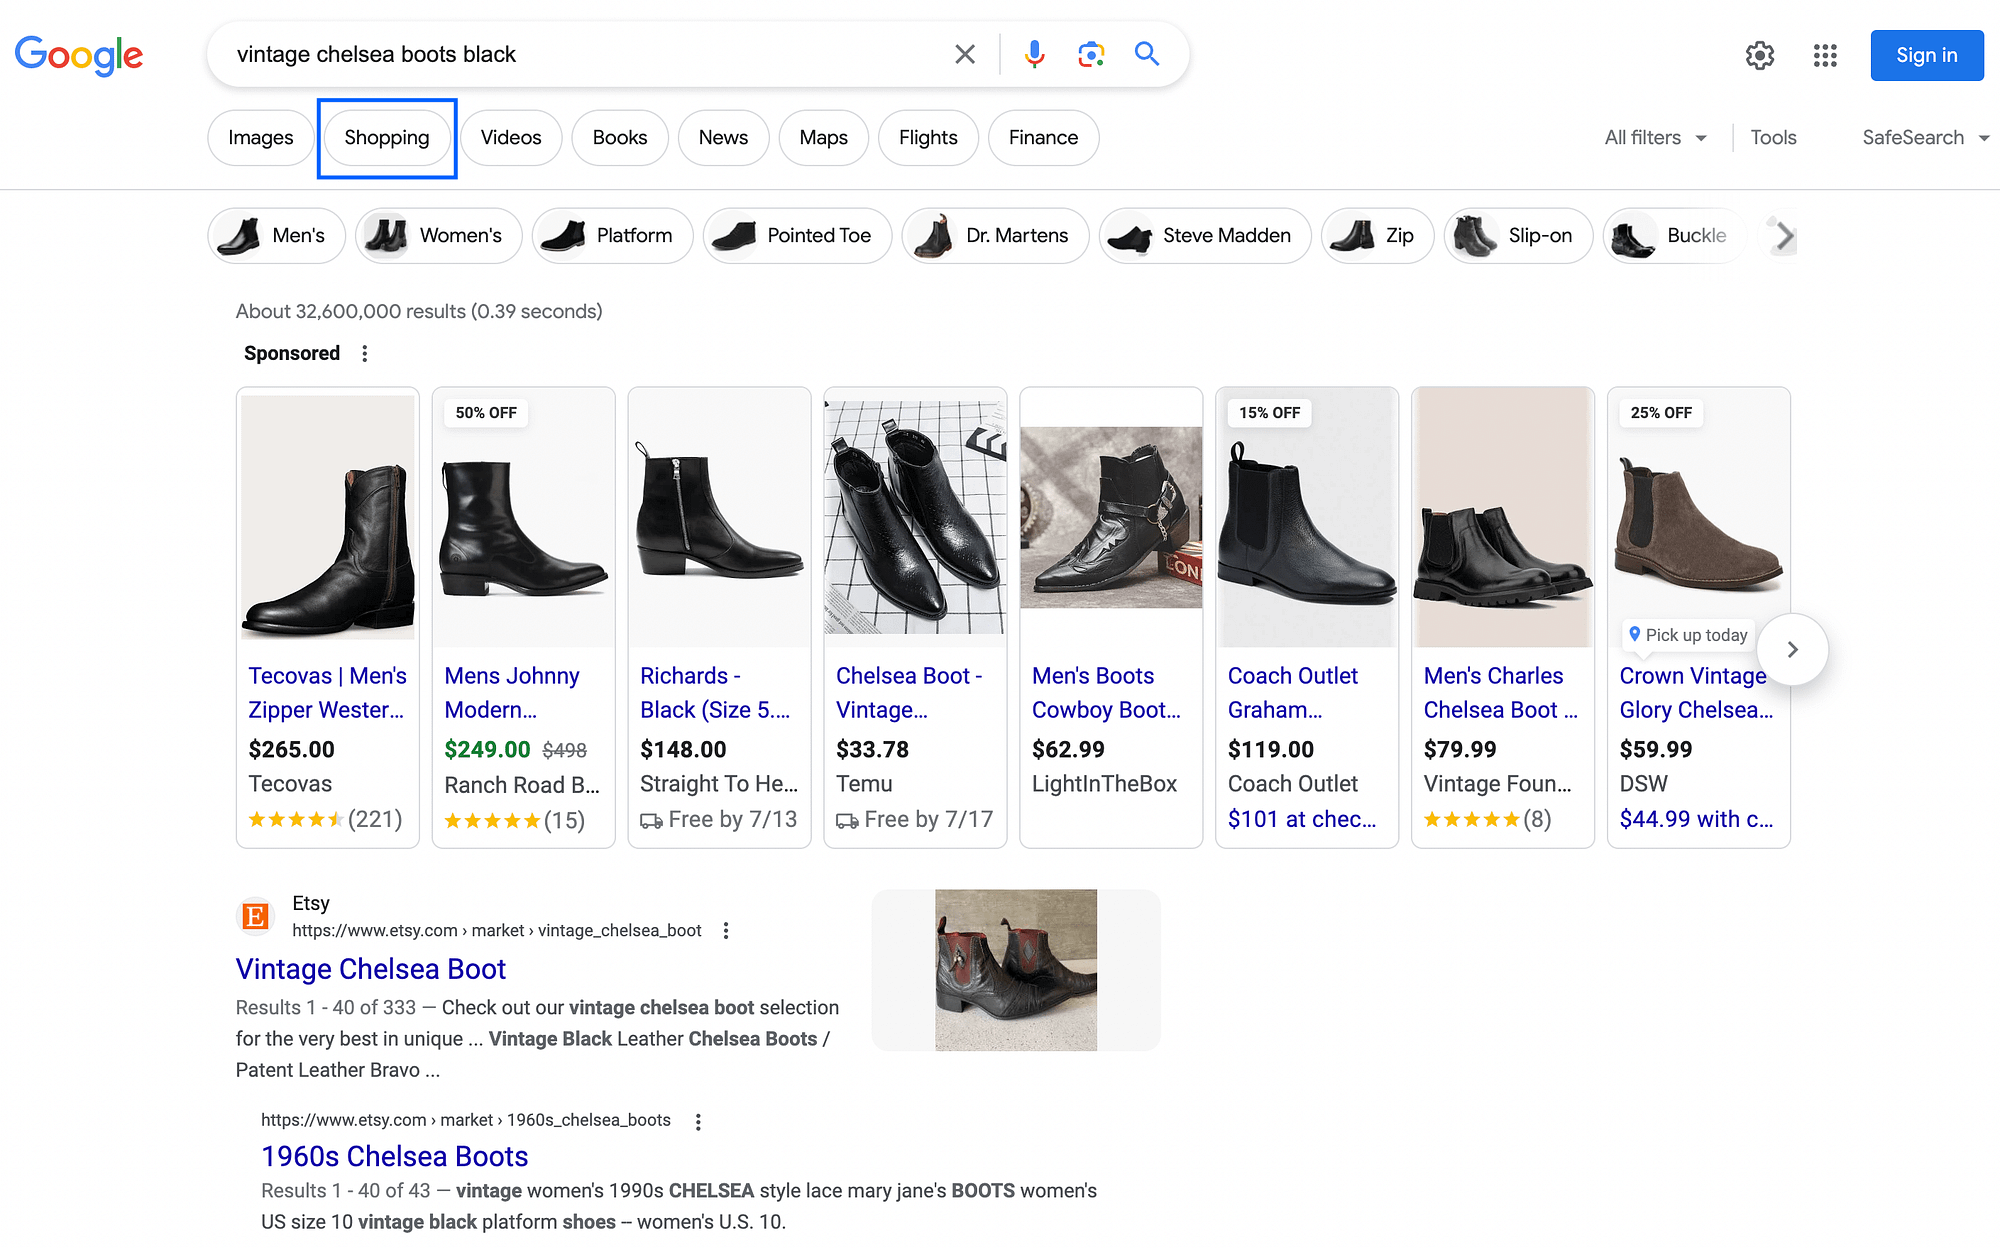 An example of a product search in Google, using the search term "vintage chelsea boots black".